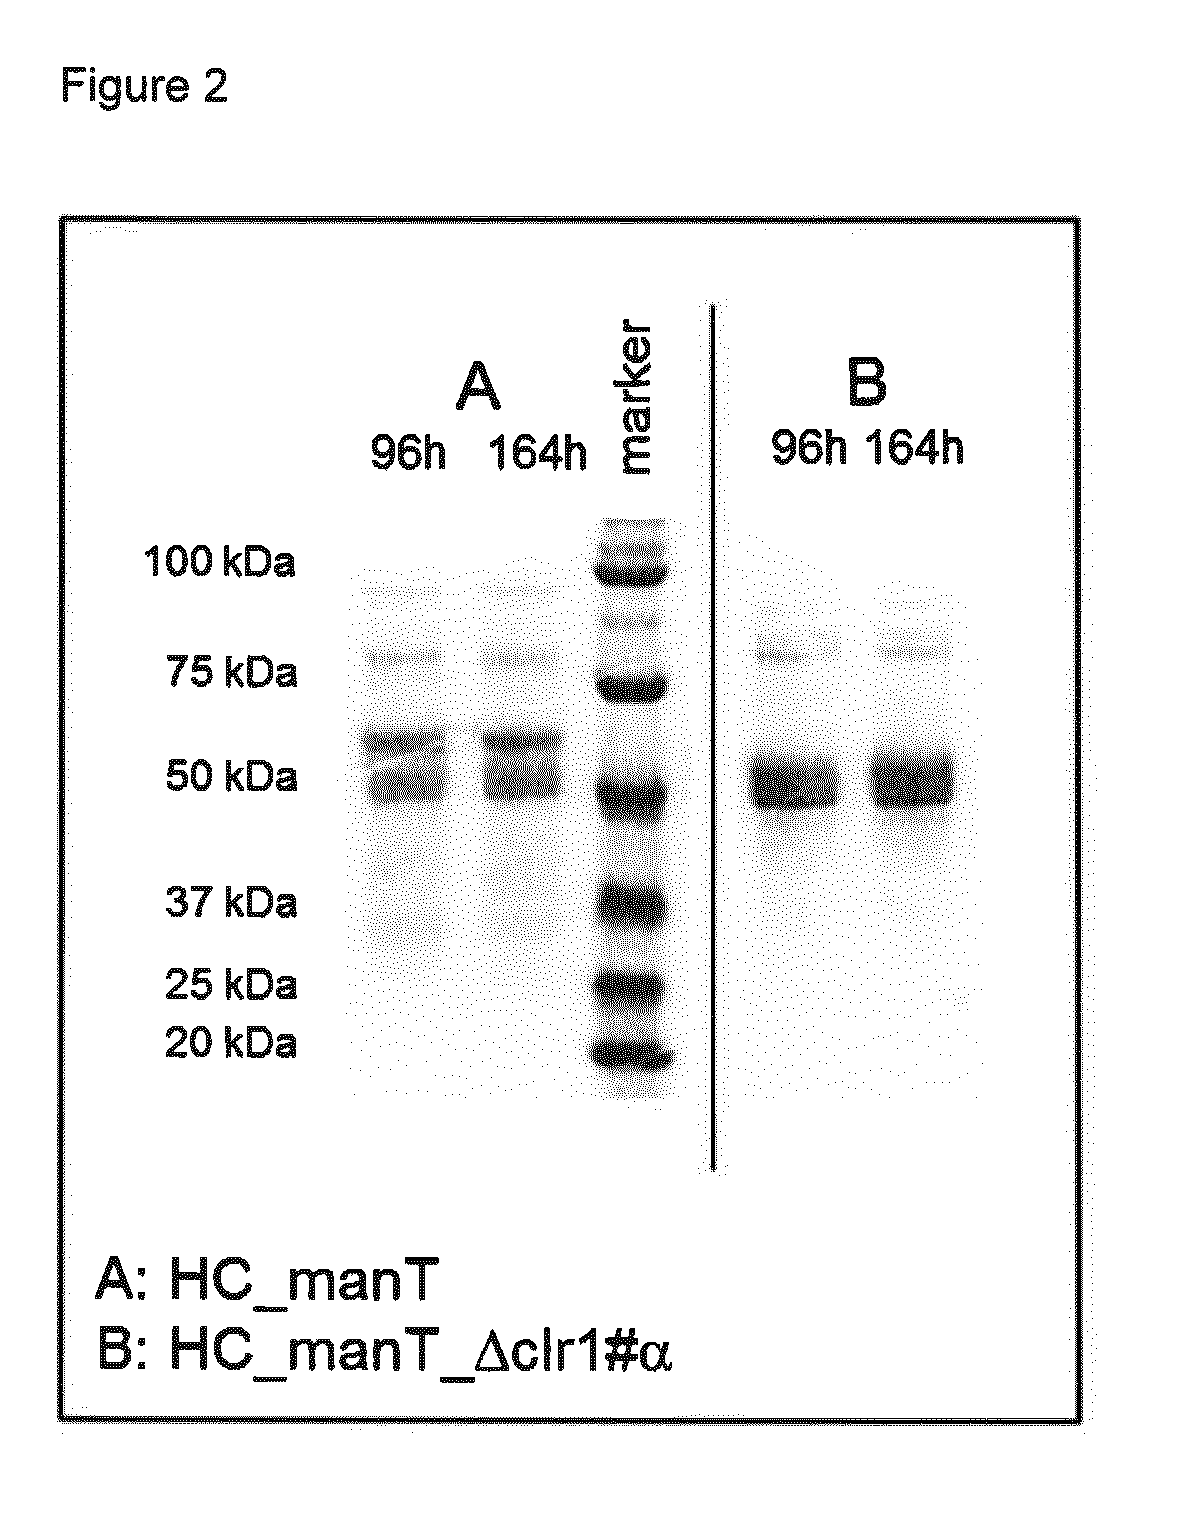 Method of producing proteins in filamentous fungi with decreased clr1 activity